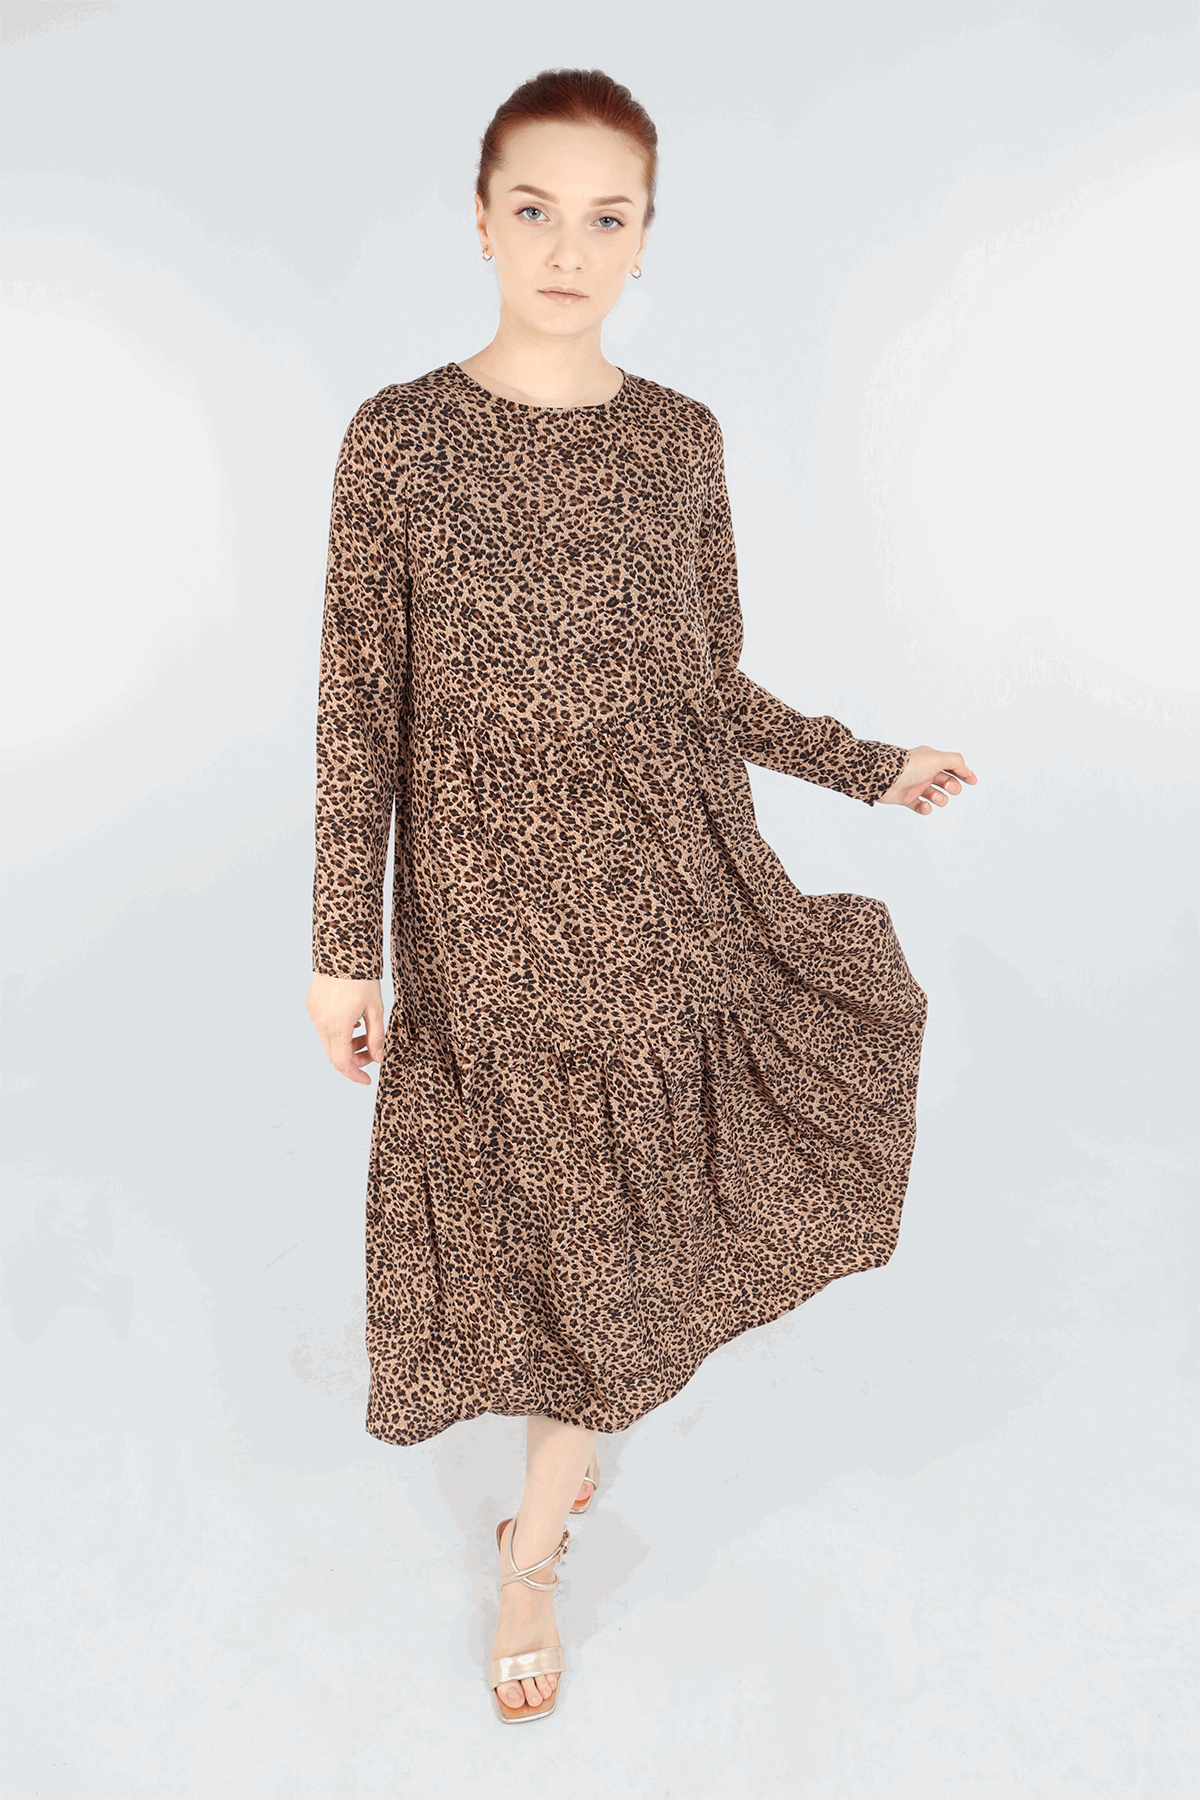 Neutral Leopard Print Tiered Dress with Pockets - Allison's Boutique